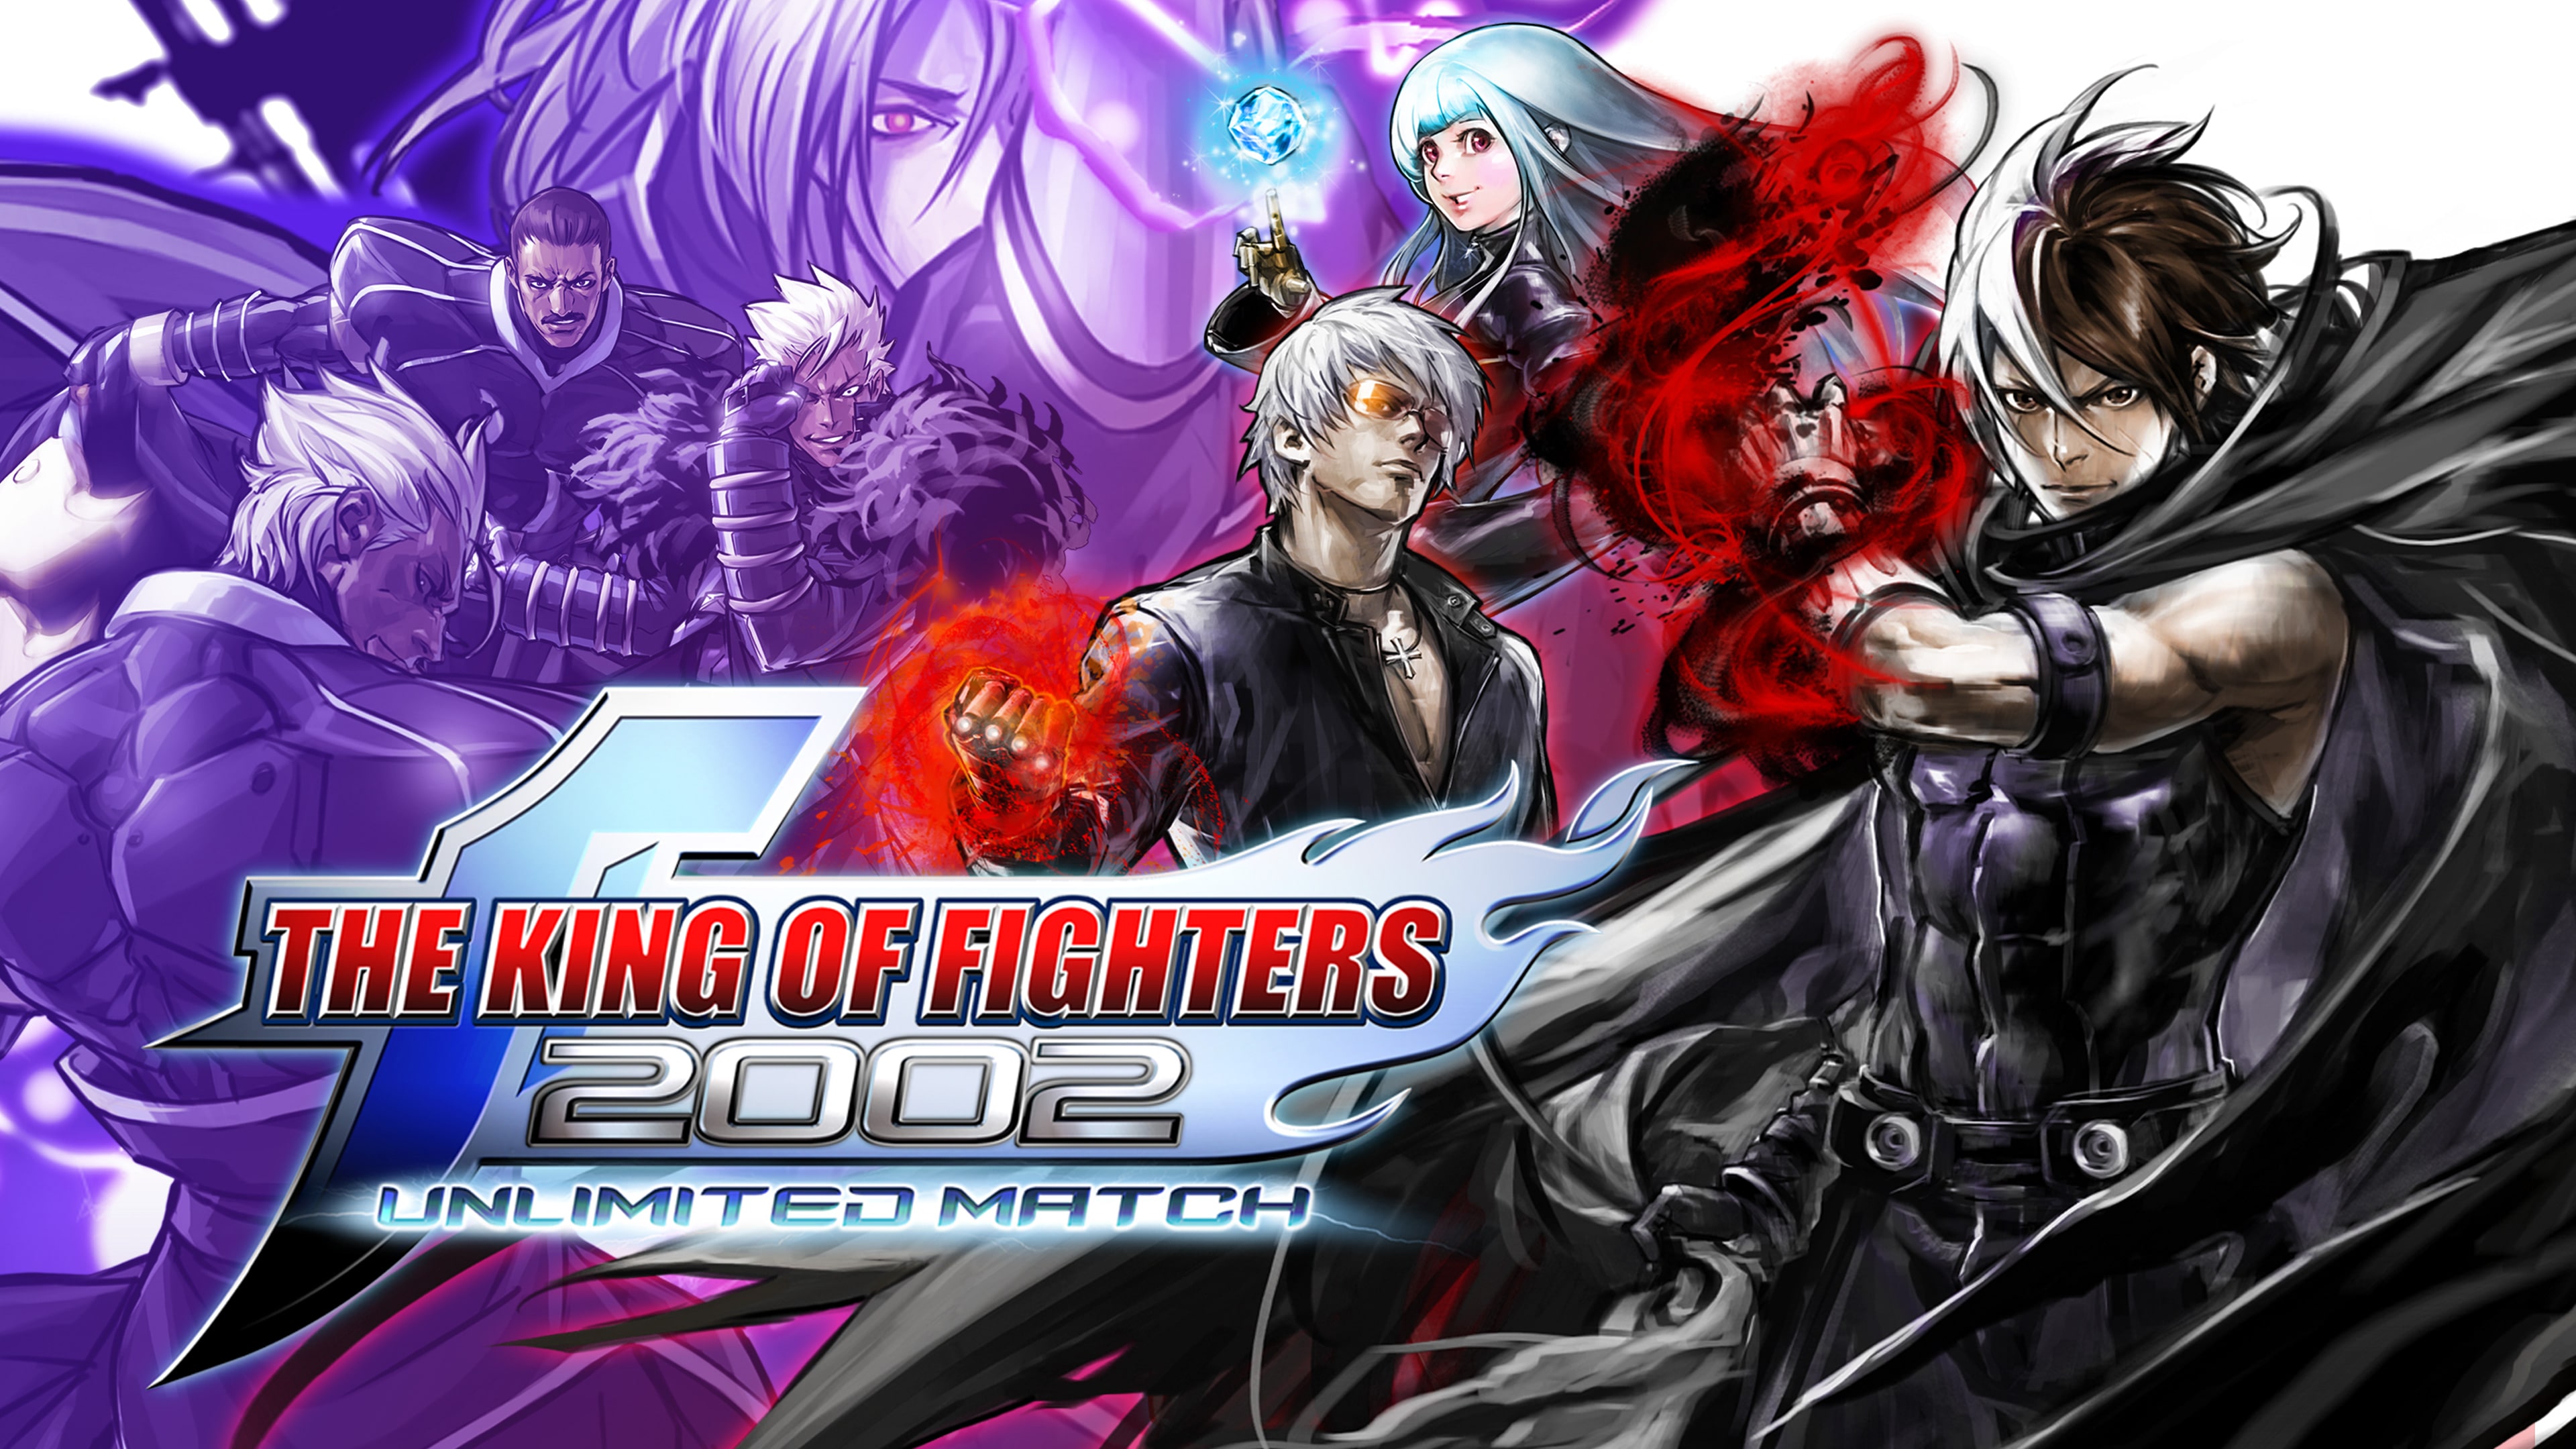 THE KING OF FIGHTERS 2002 UNLIMITED MATC